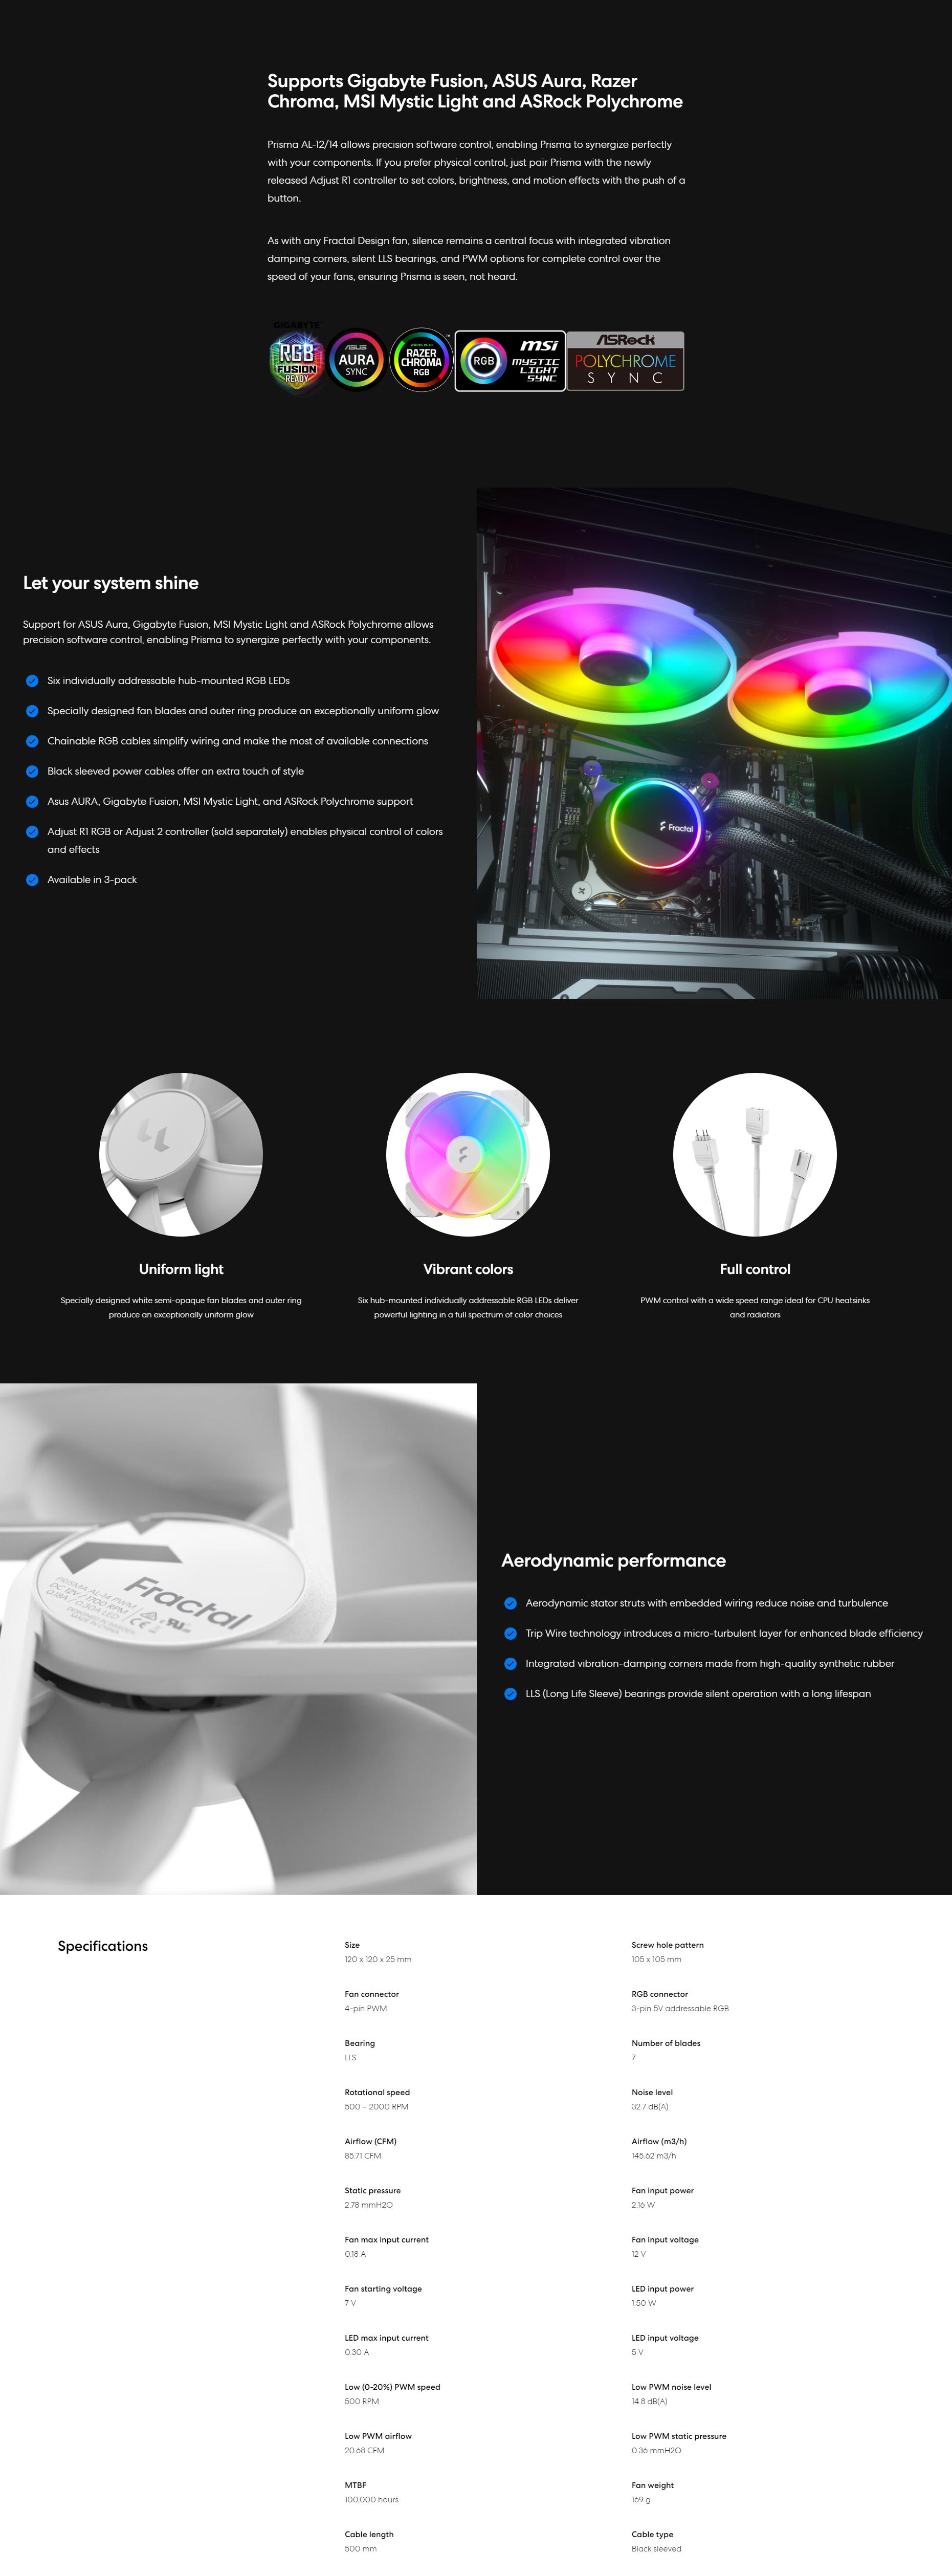 A large marketing image providing additional information about the product Fractal Design Prisma AL-12 ARGB PWM White - Additional alt info not provided